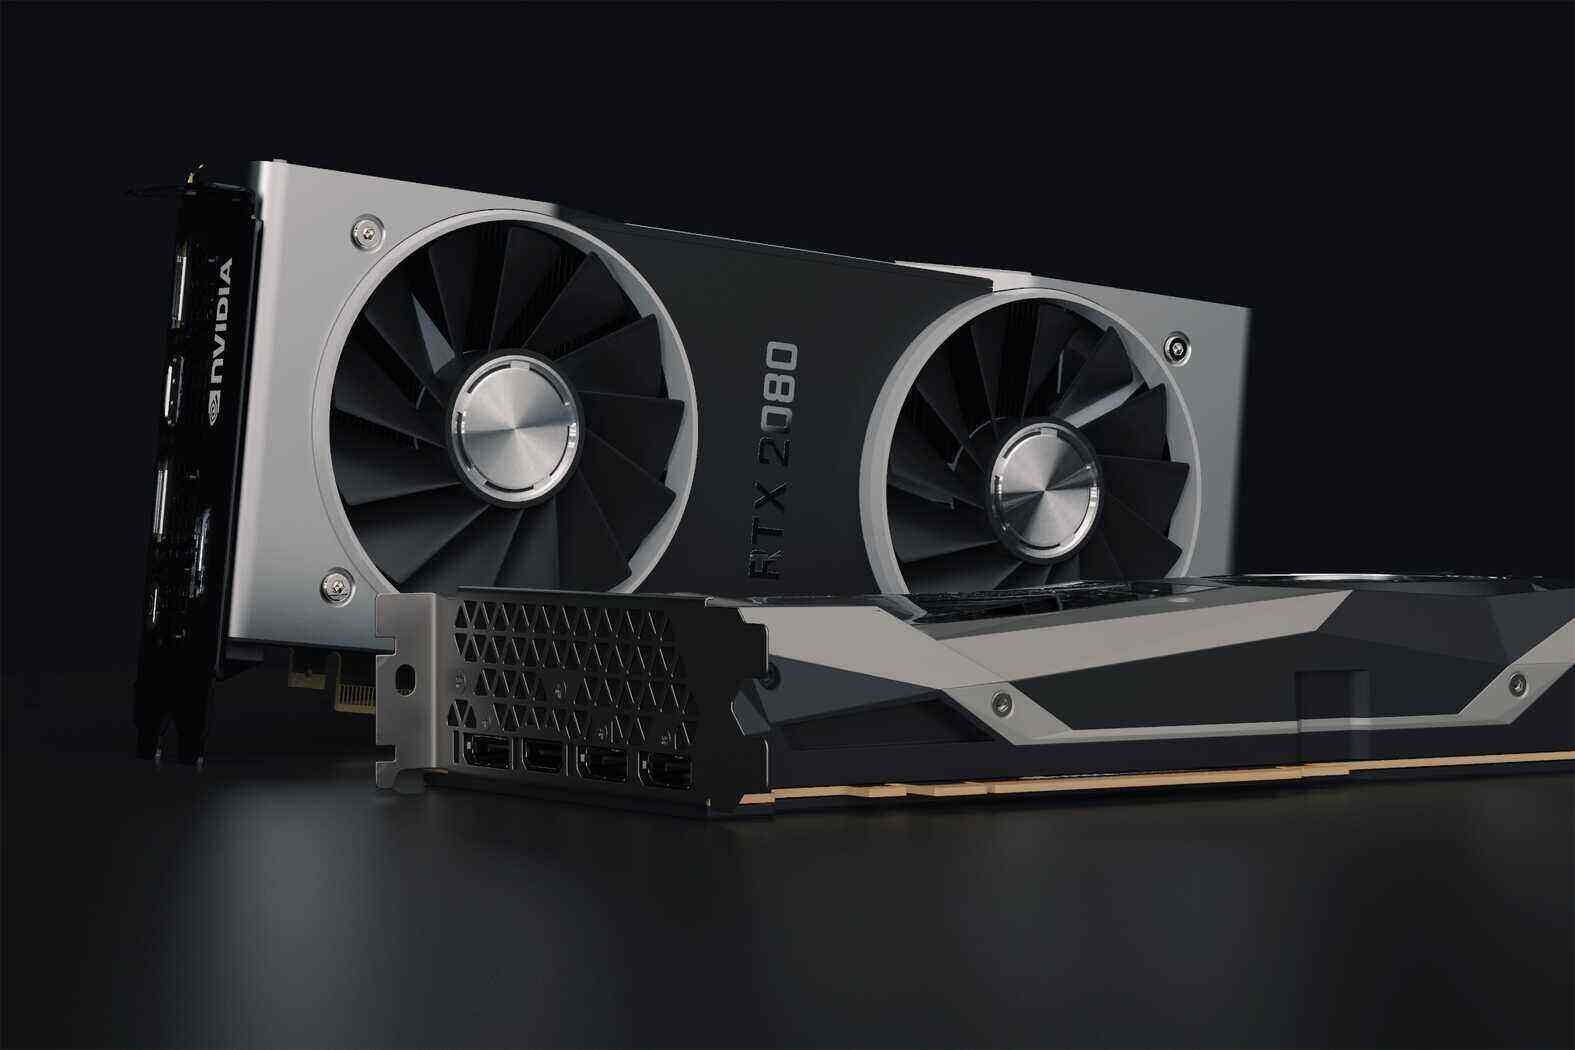 High pricing of GPUs and the reasons behind it